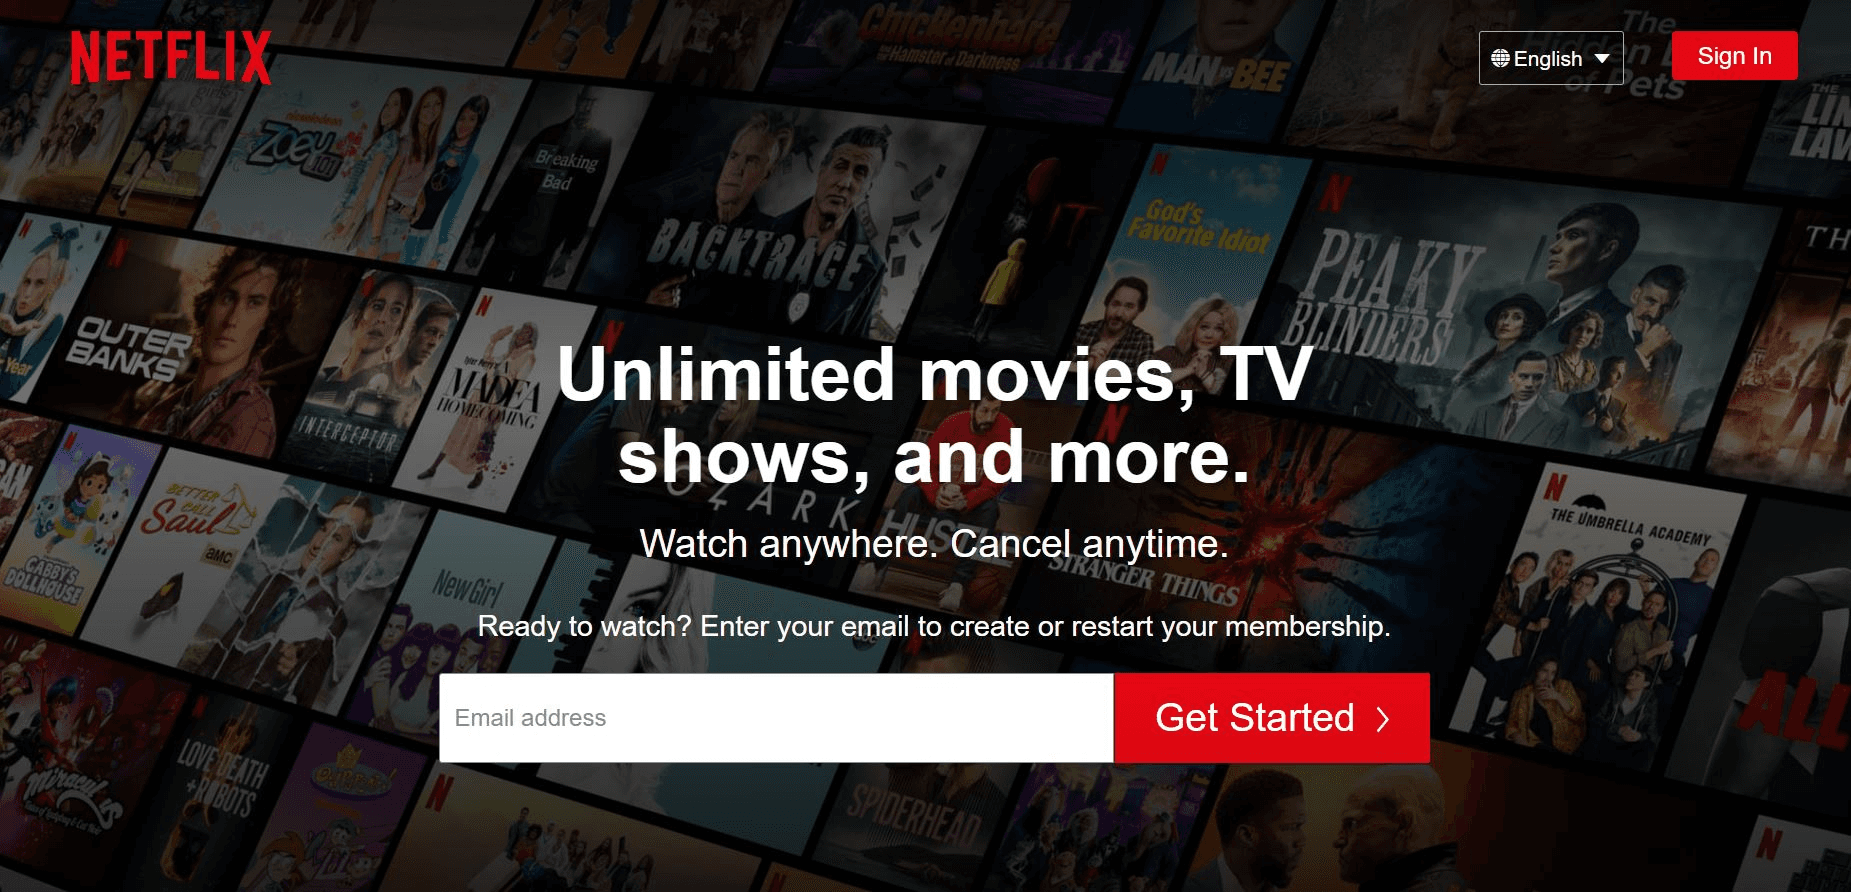 Allow third party cookies to get the most out of Netflix. 